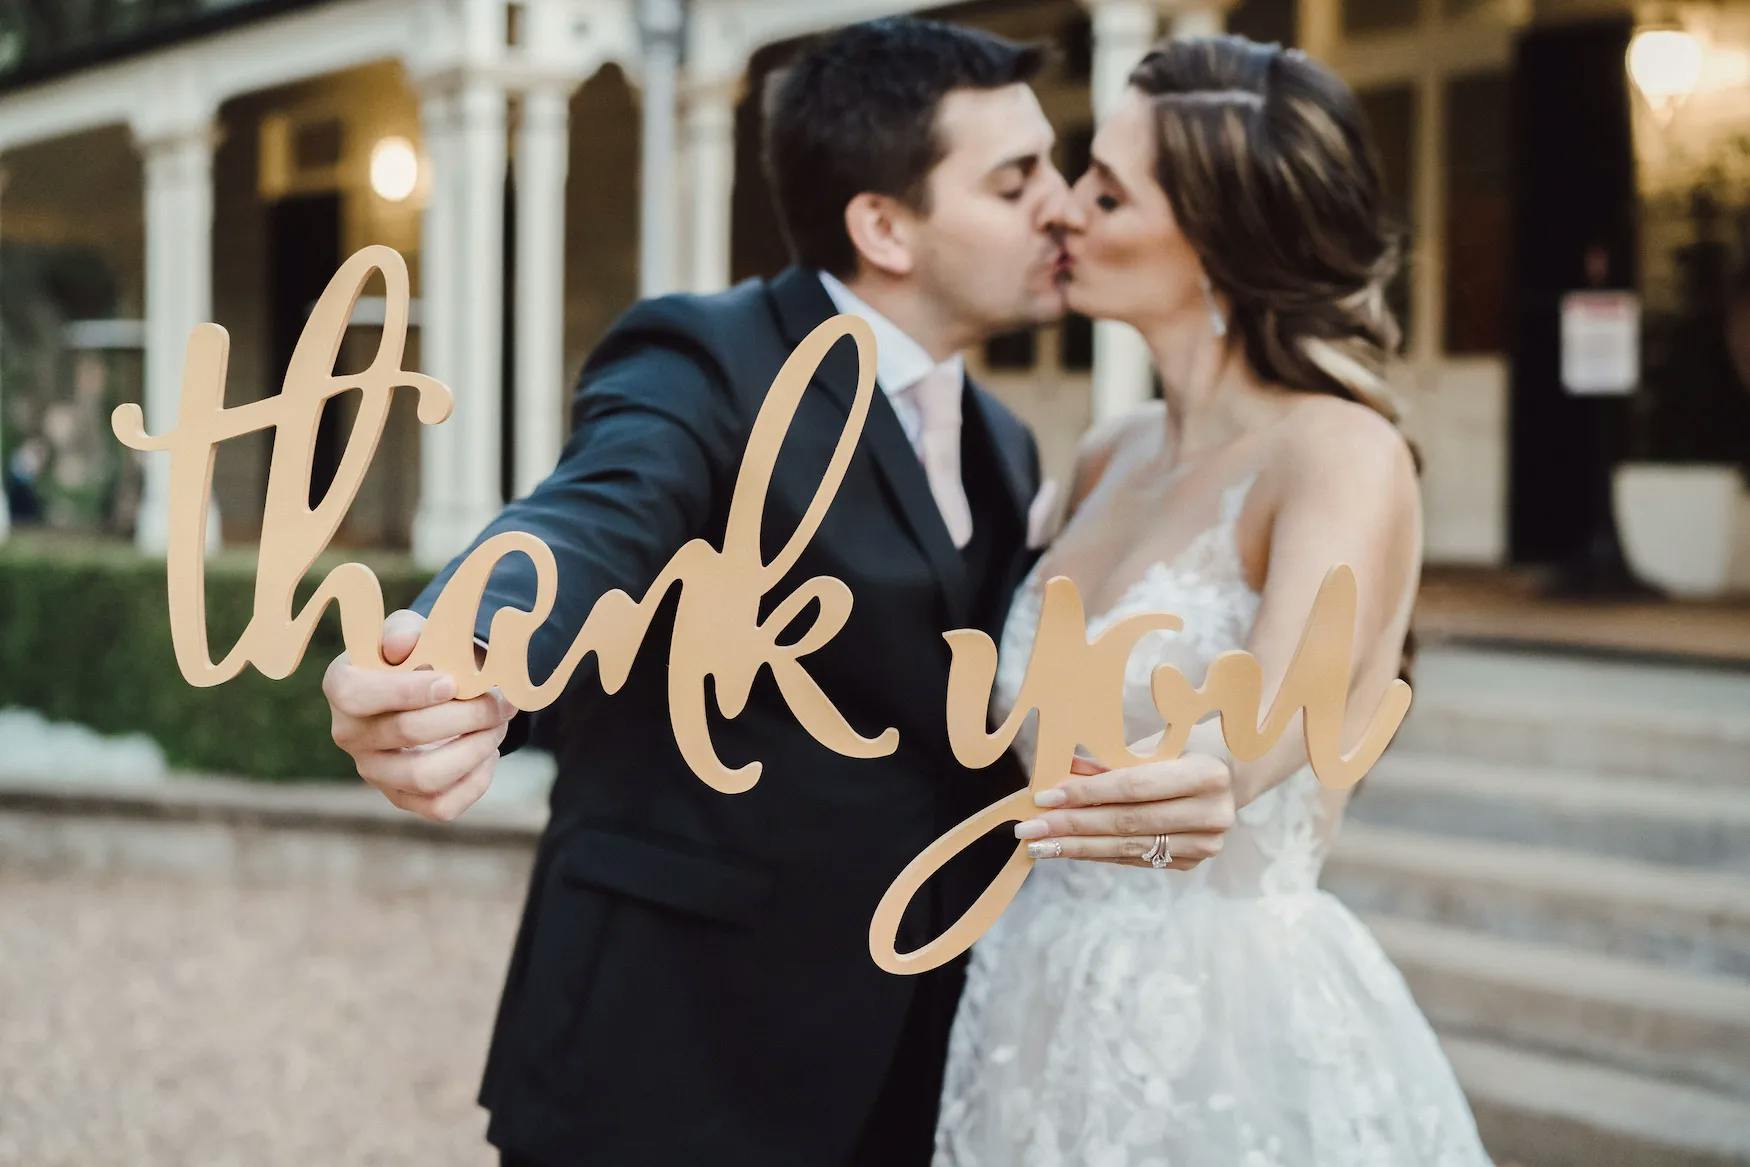 A bride and groom, in wedding attire, share a kiss while holding a decorative sign that says "thank you" in cursive letters. The background features a building with an elegant outdoor setting.